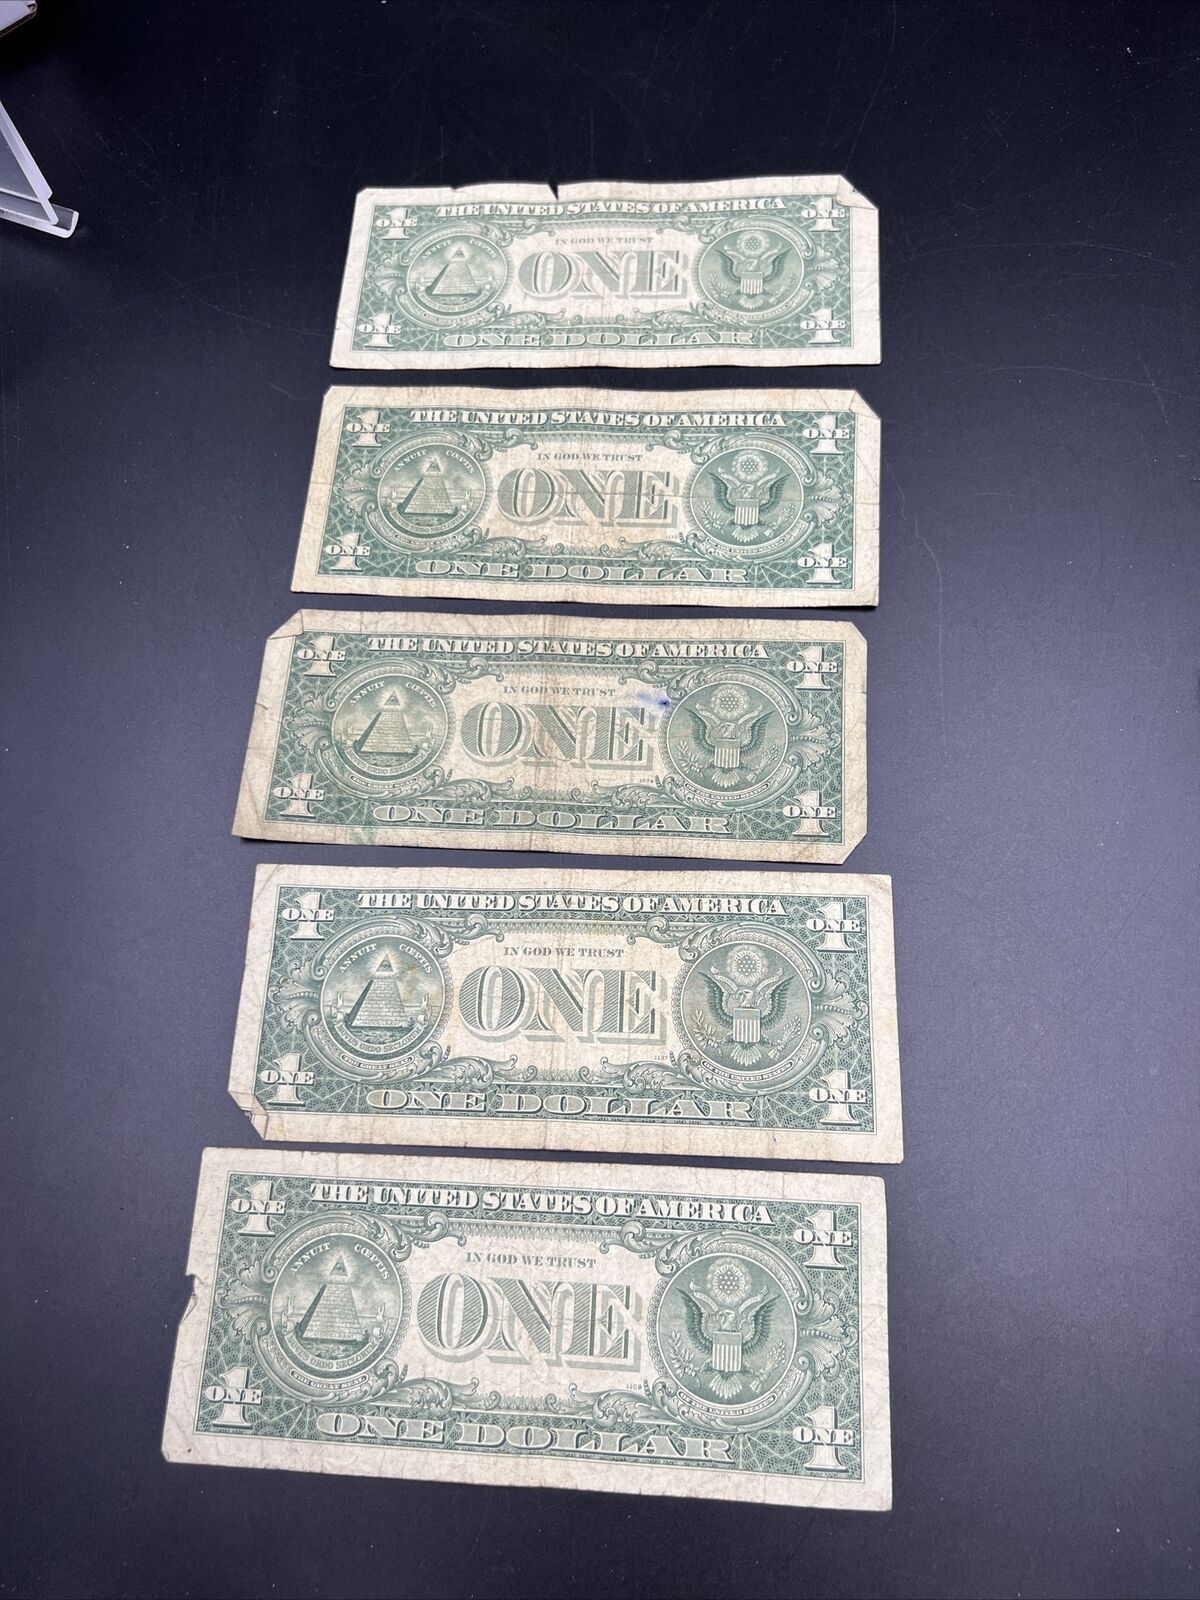 5 Note lot 1963 B $1 Barr Signature Federal Reserve Note FRN Green Seal Cull- VG